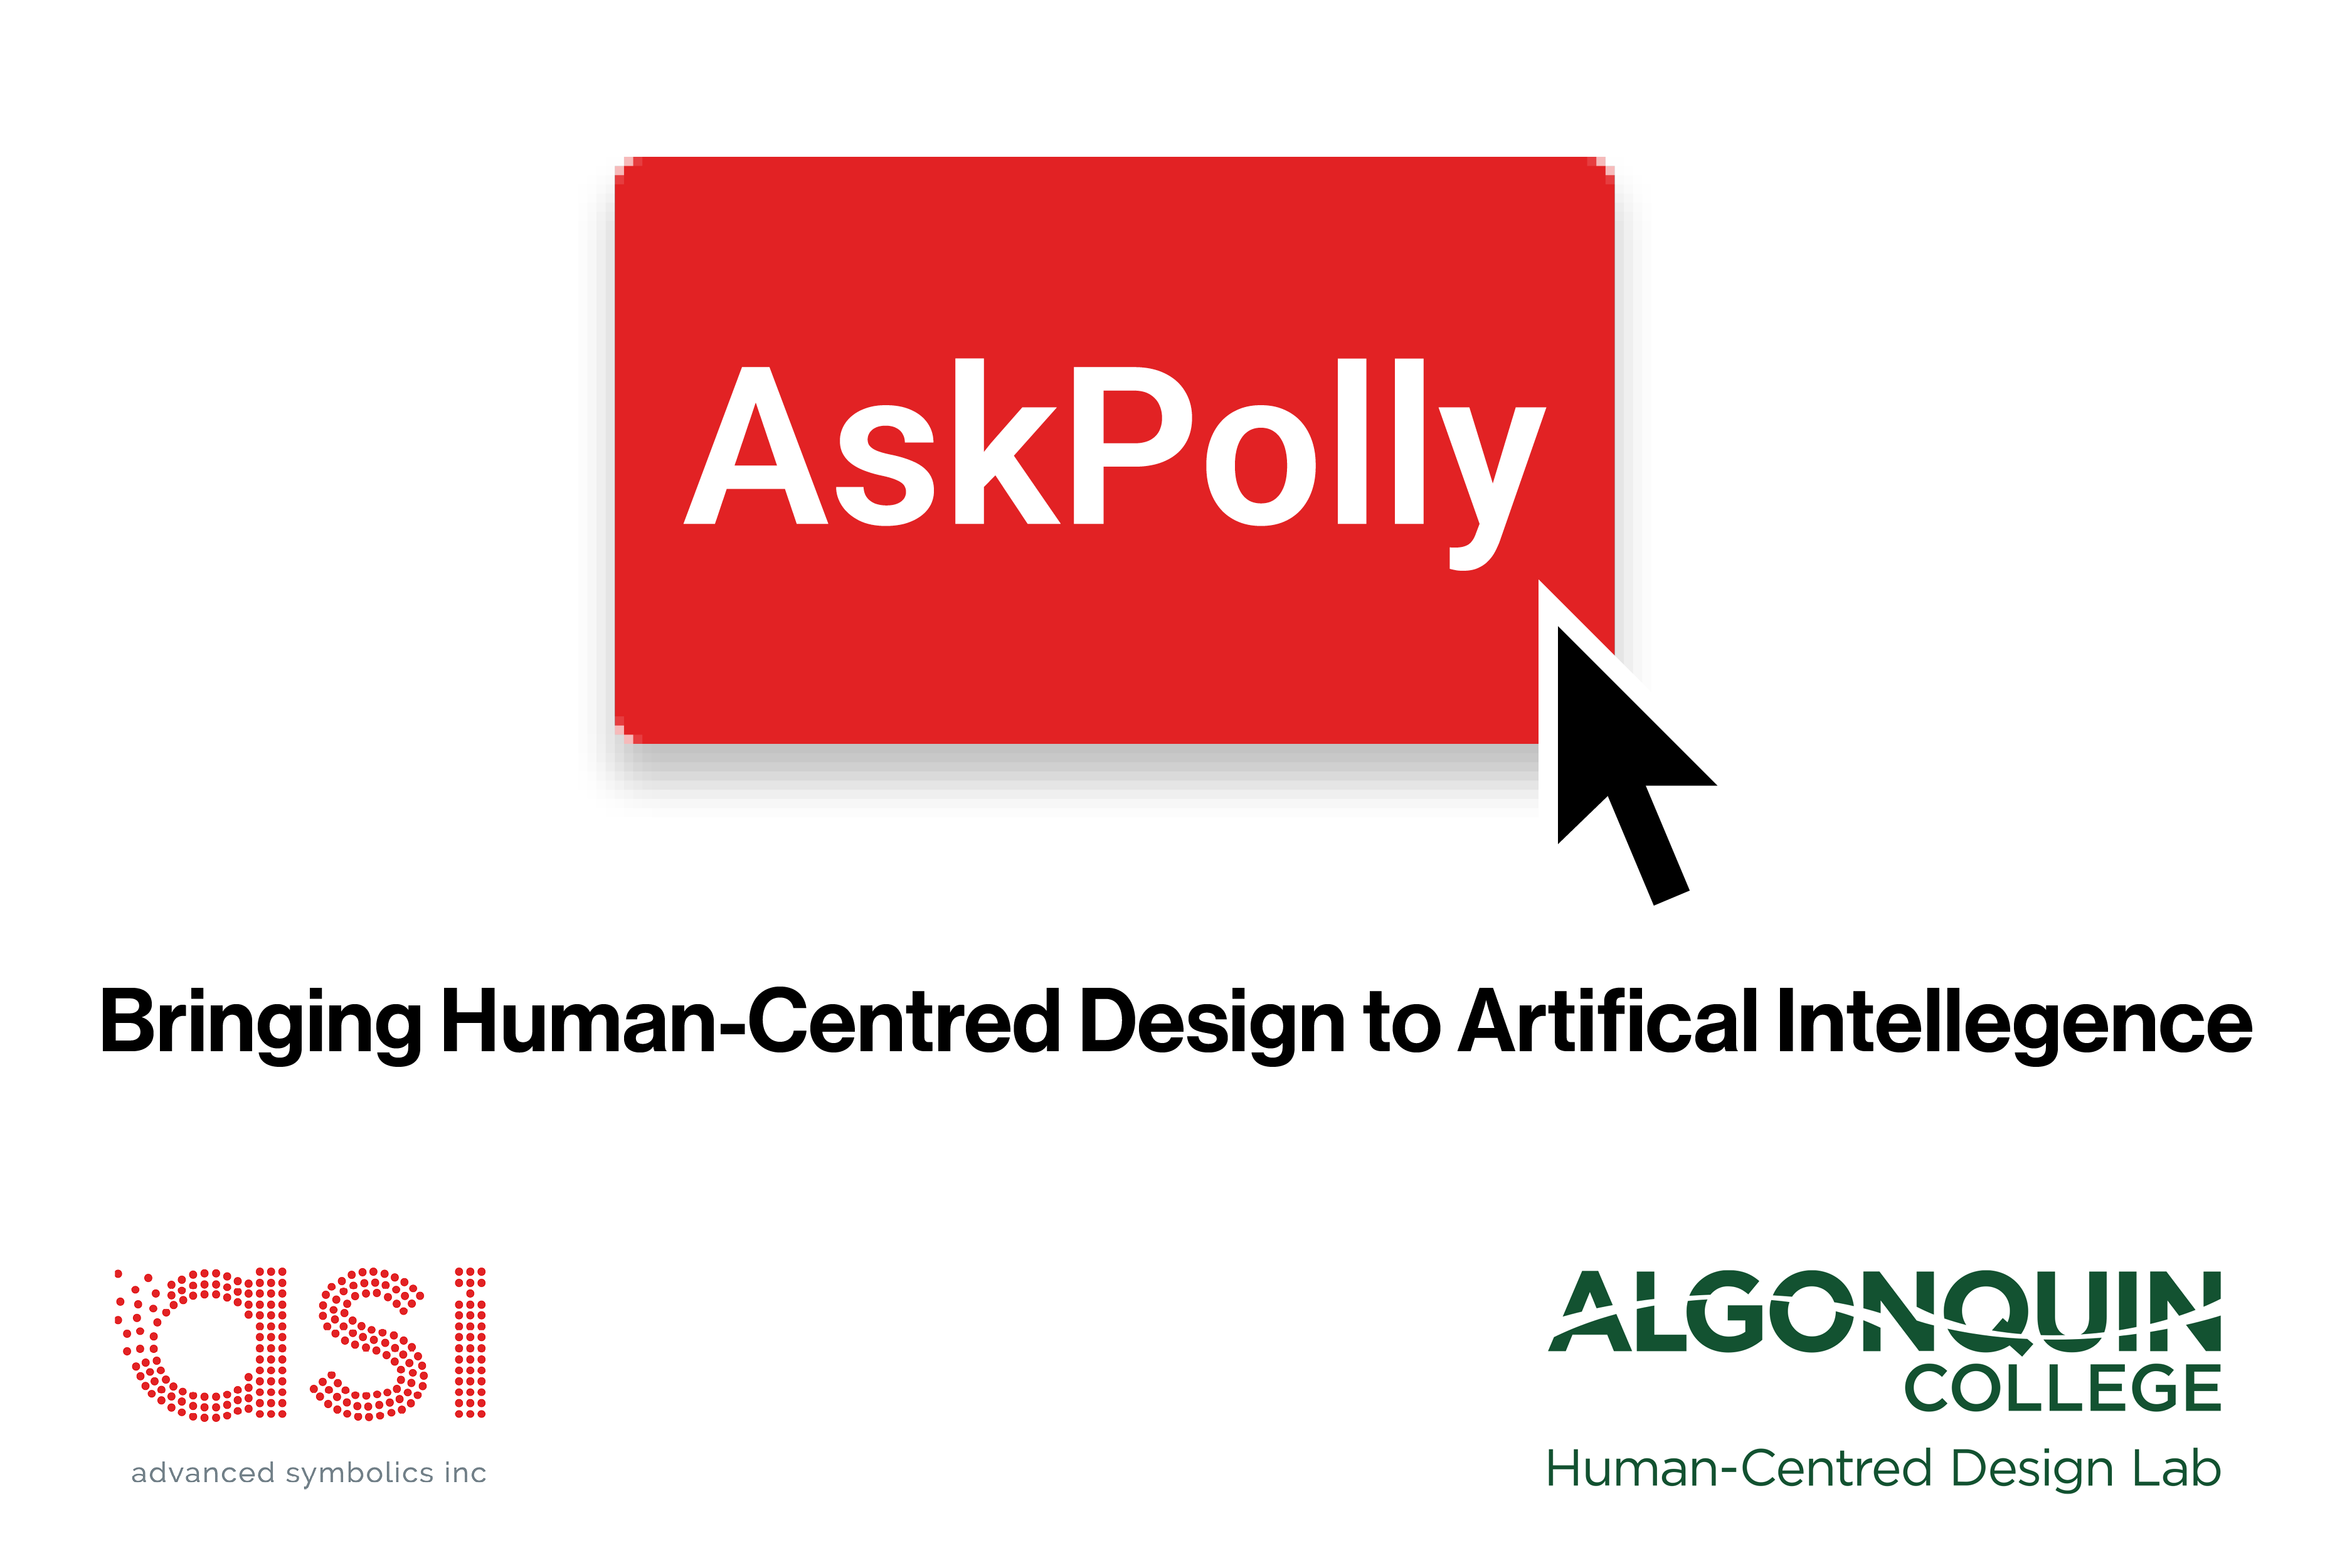 AskPolly, Bringing Human-Centered Design to Artificial Intelligence